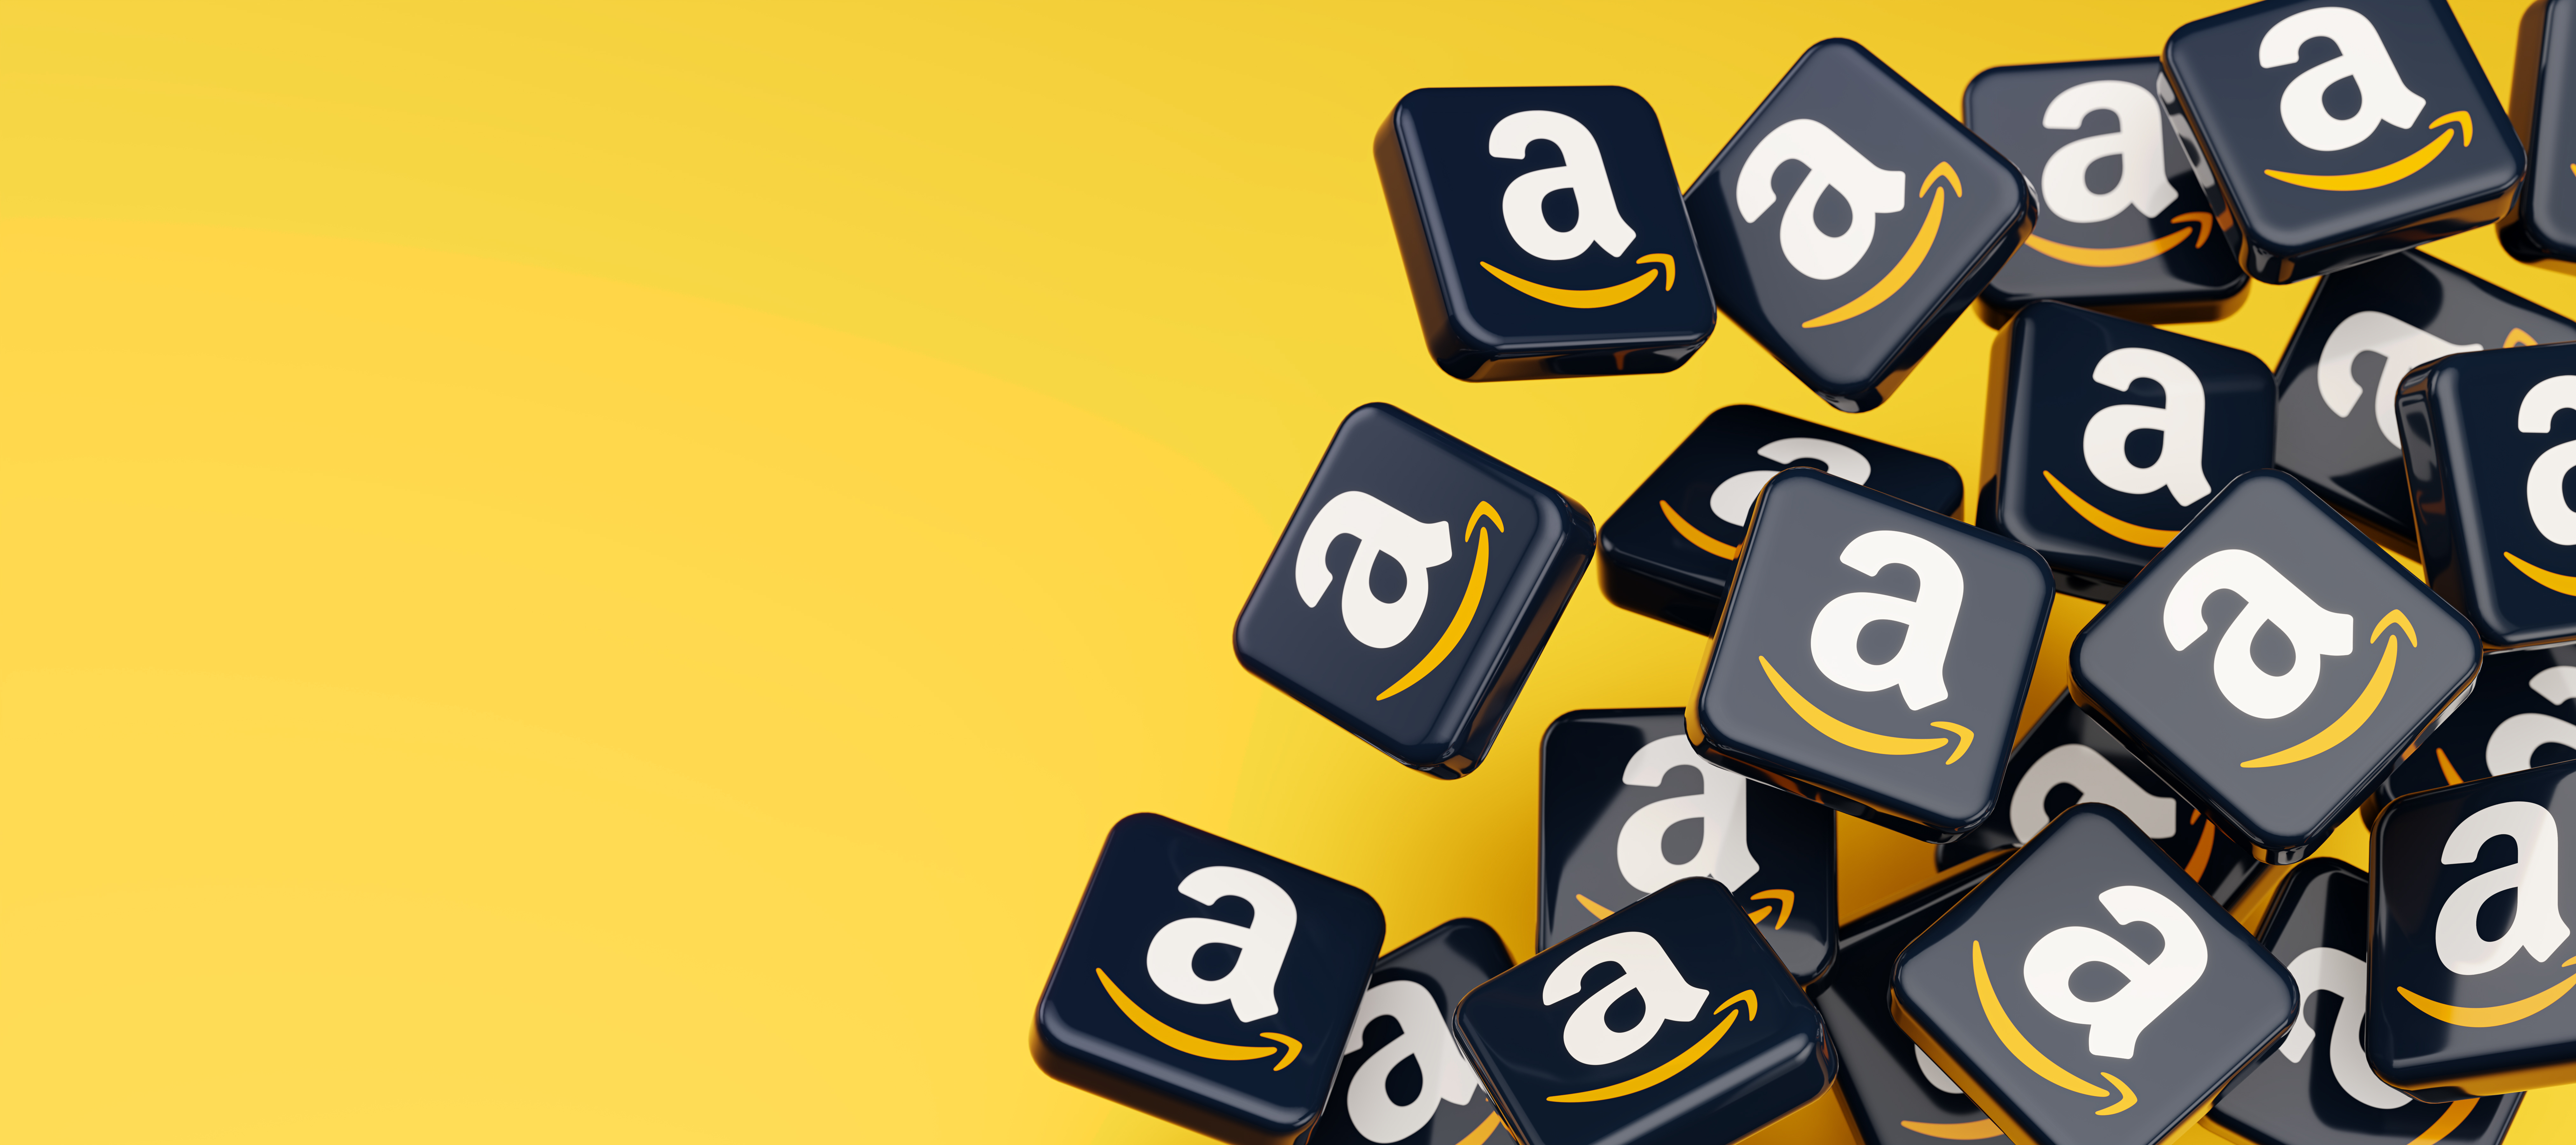 Amazon logo buttons on yellow background